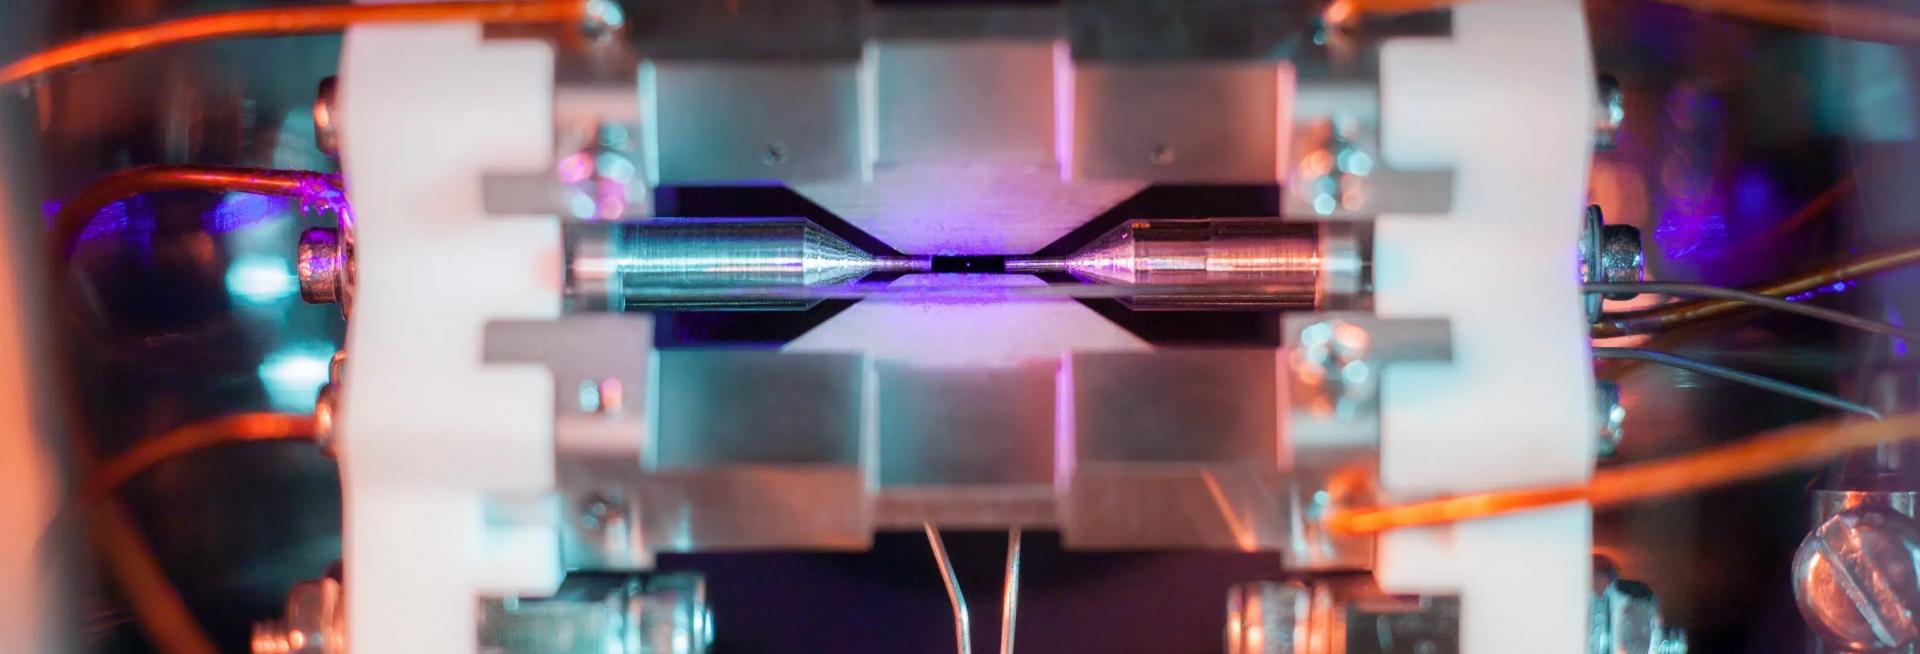 A photograph of a single positively-charged strontium atom, held near motionless by electric fields emanating from the metal electrodes surrounding it 